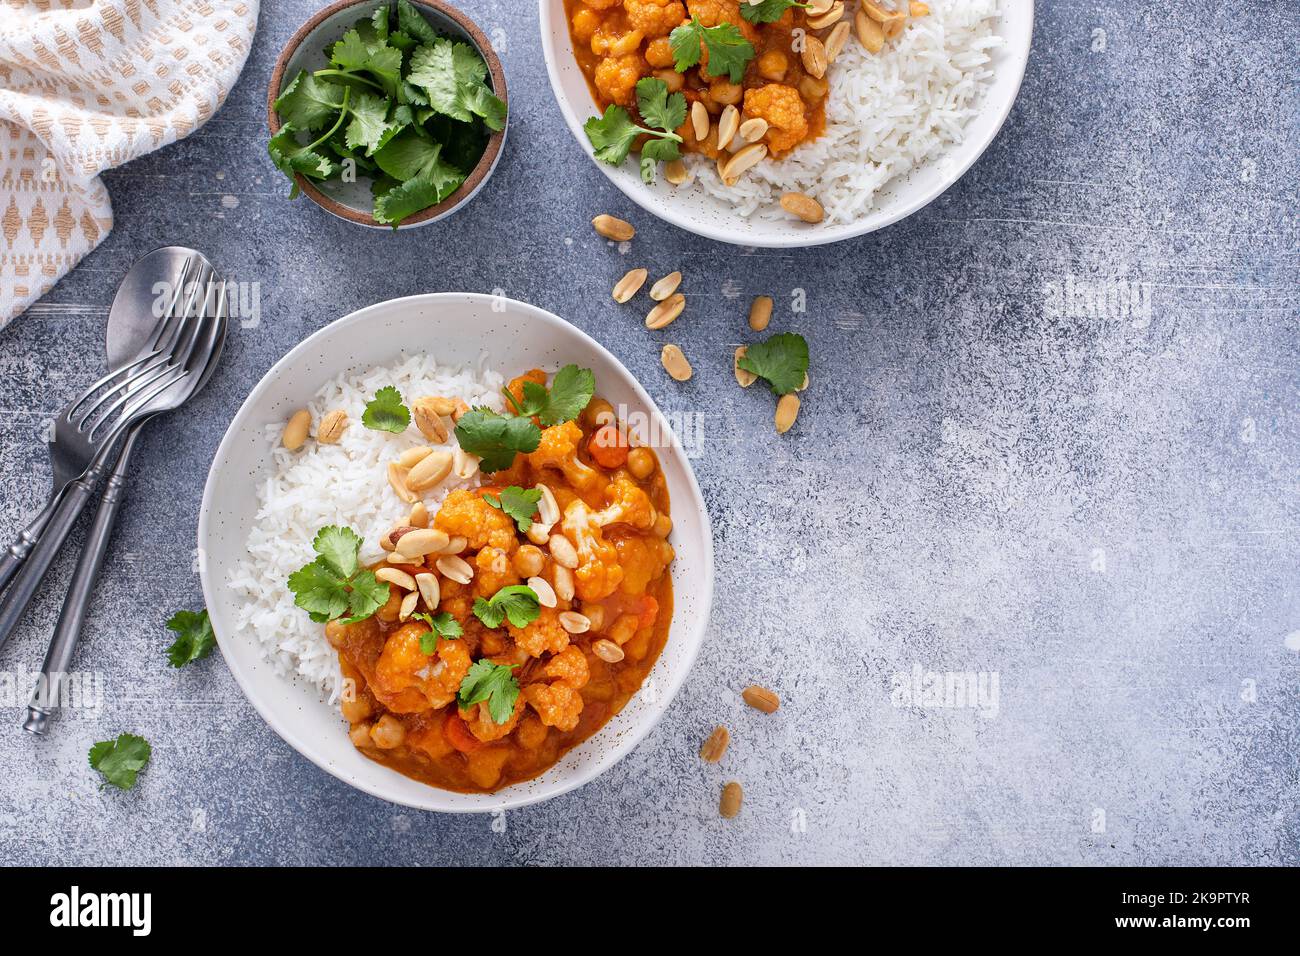 Vegan curry with cauliflower, chickpeas and butternut squash Stock Photo